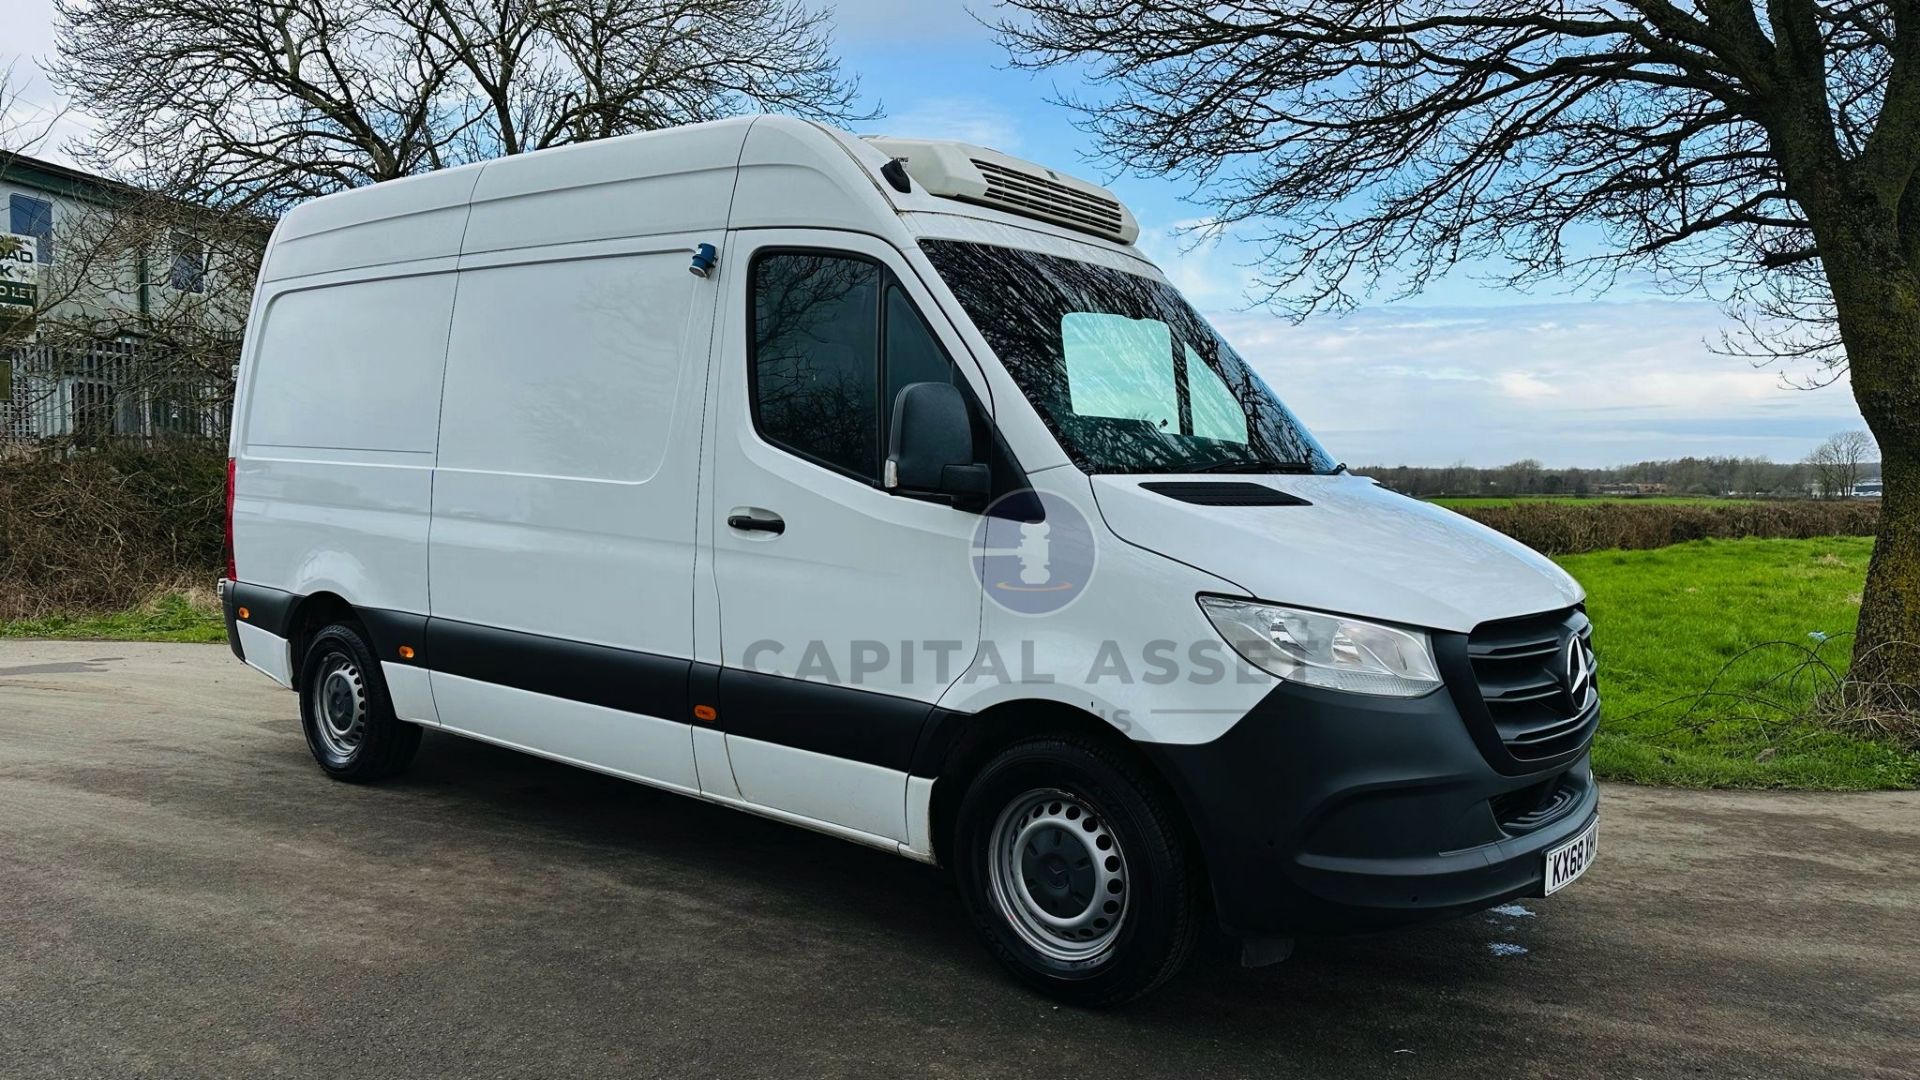 MERCEDES-BENZ SPRINTER 314 CDI *MWB - REFRIGERATED VAN* (2019 - FACELIFT MODEL) *OVERNIGHT STANDBY* - Image 3 of 41